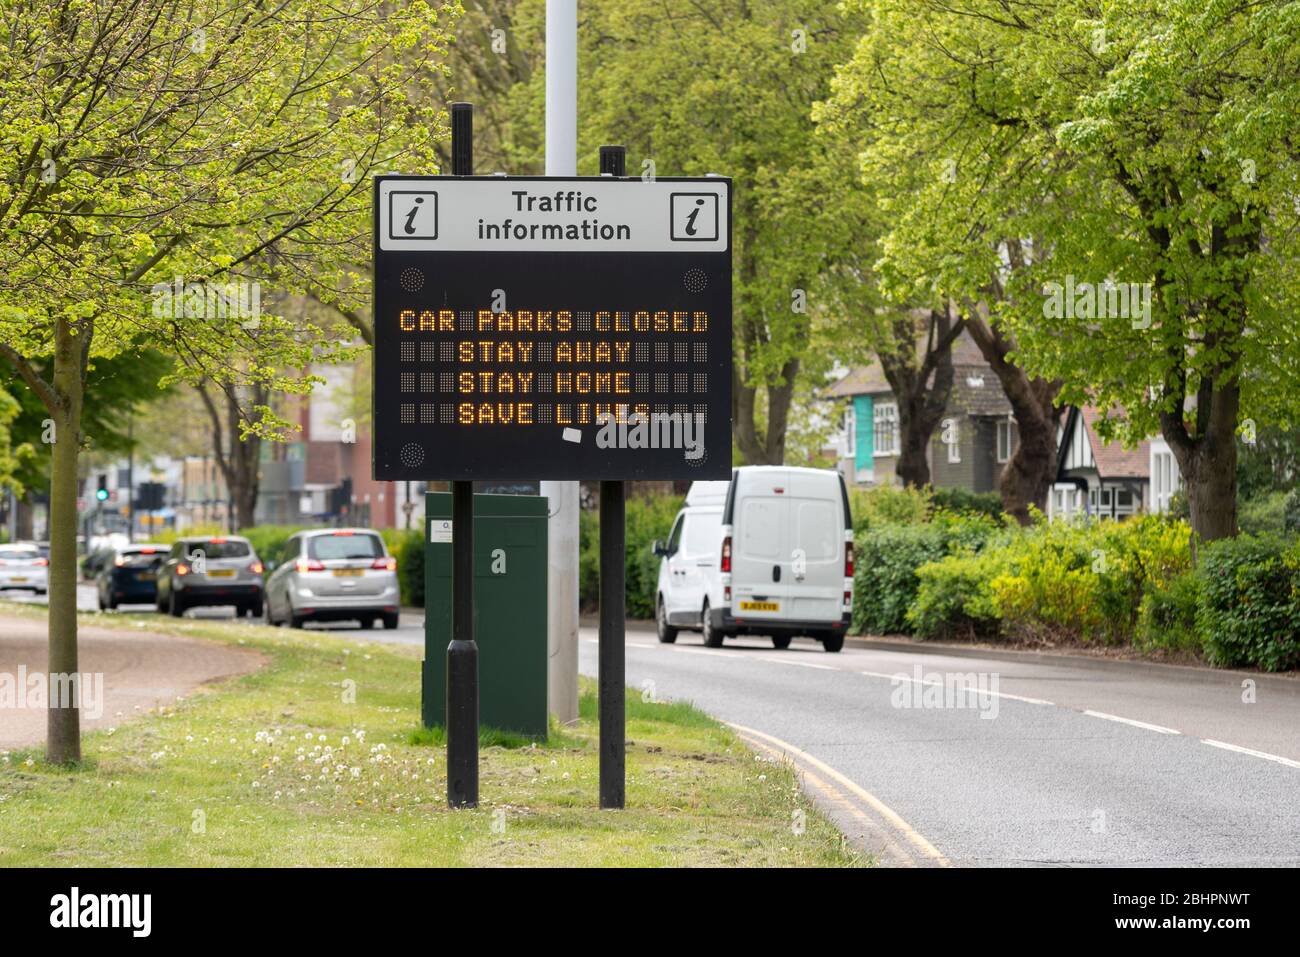 Car parks closed, stay away, stay home, save lives, sign during the COVID-19 Coronavirus pandemic outbreak period, Southend on Sea, Essex, UK. Busy Stock Photo